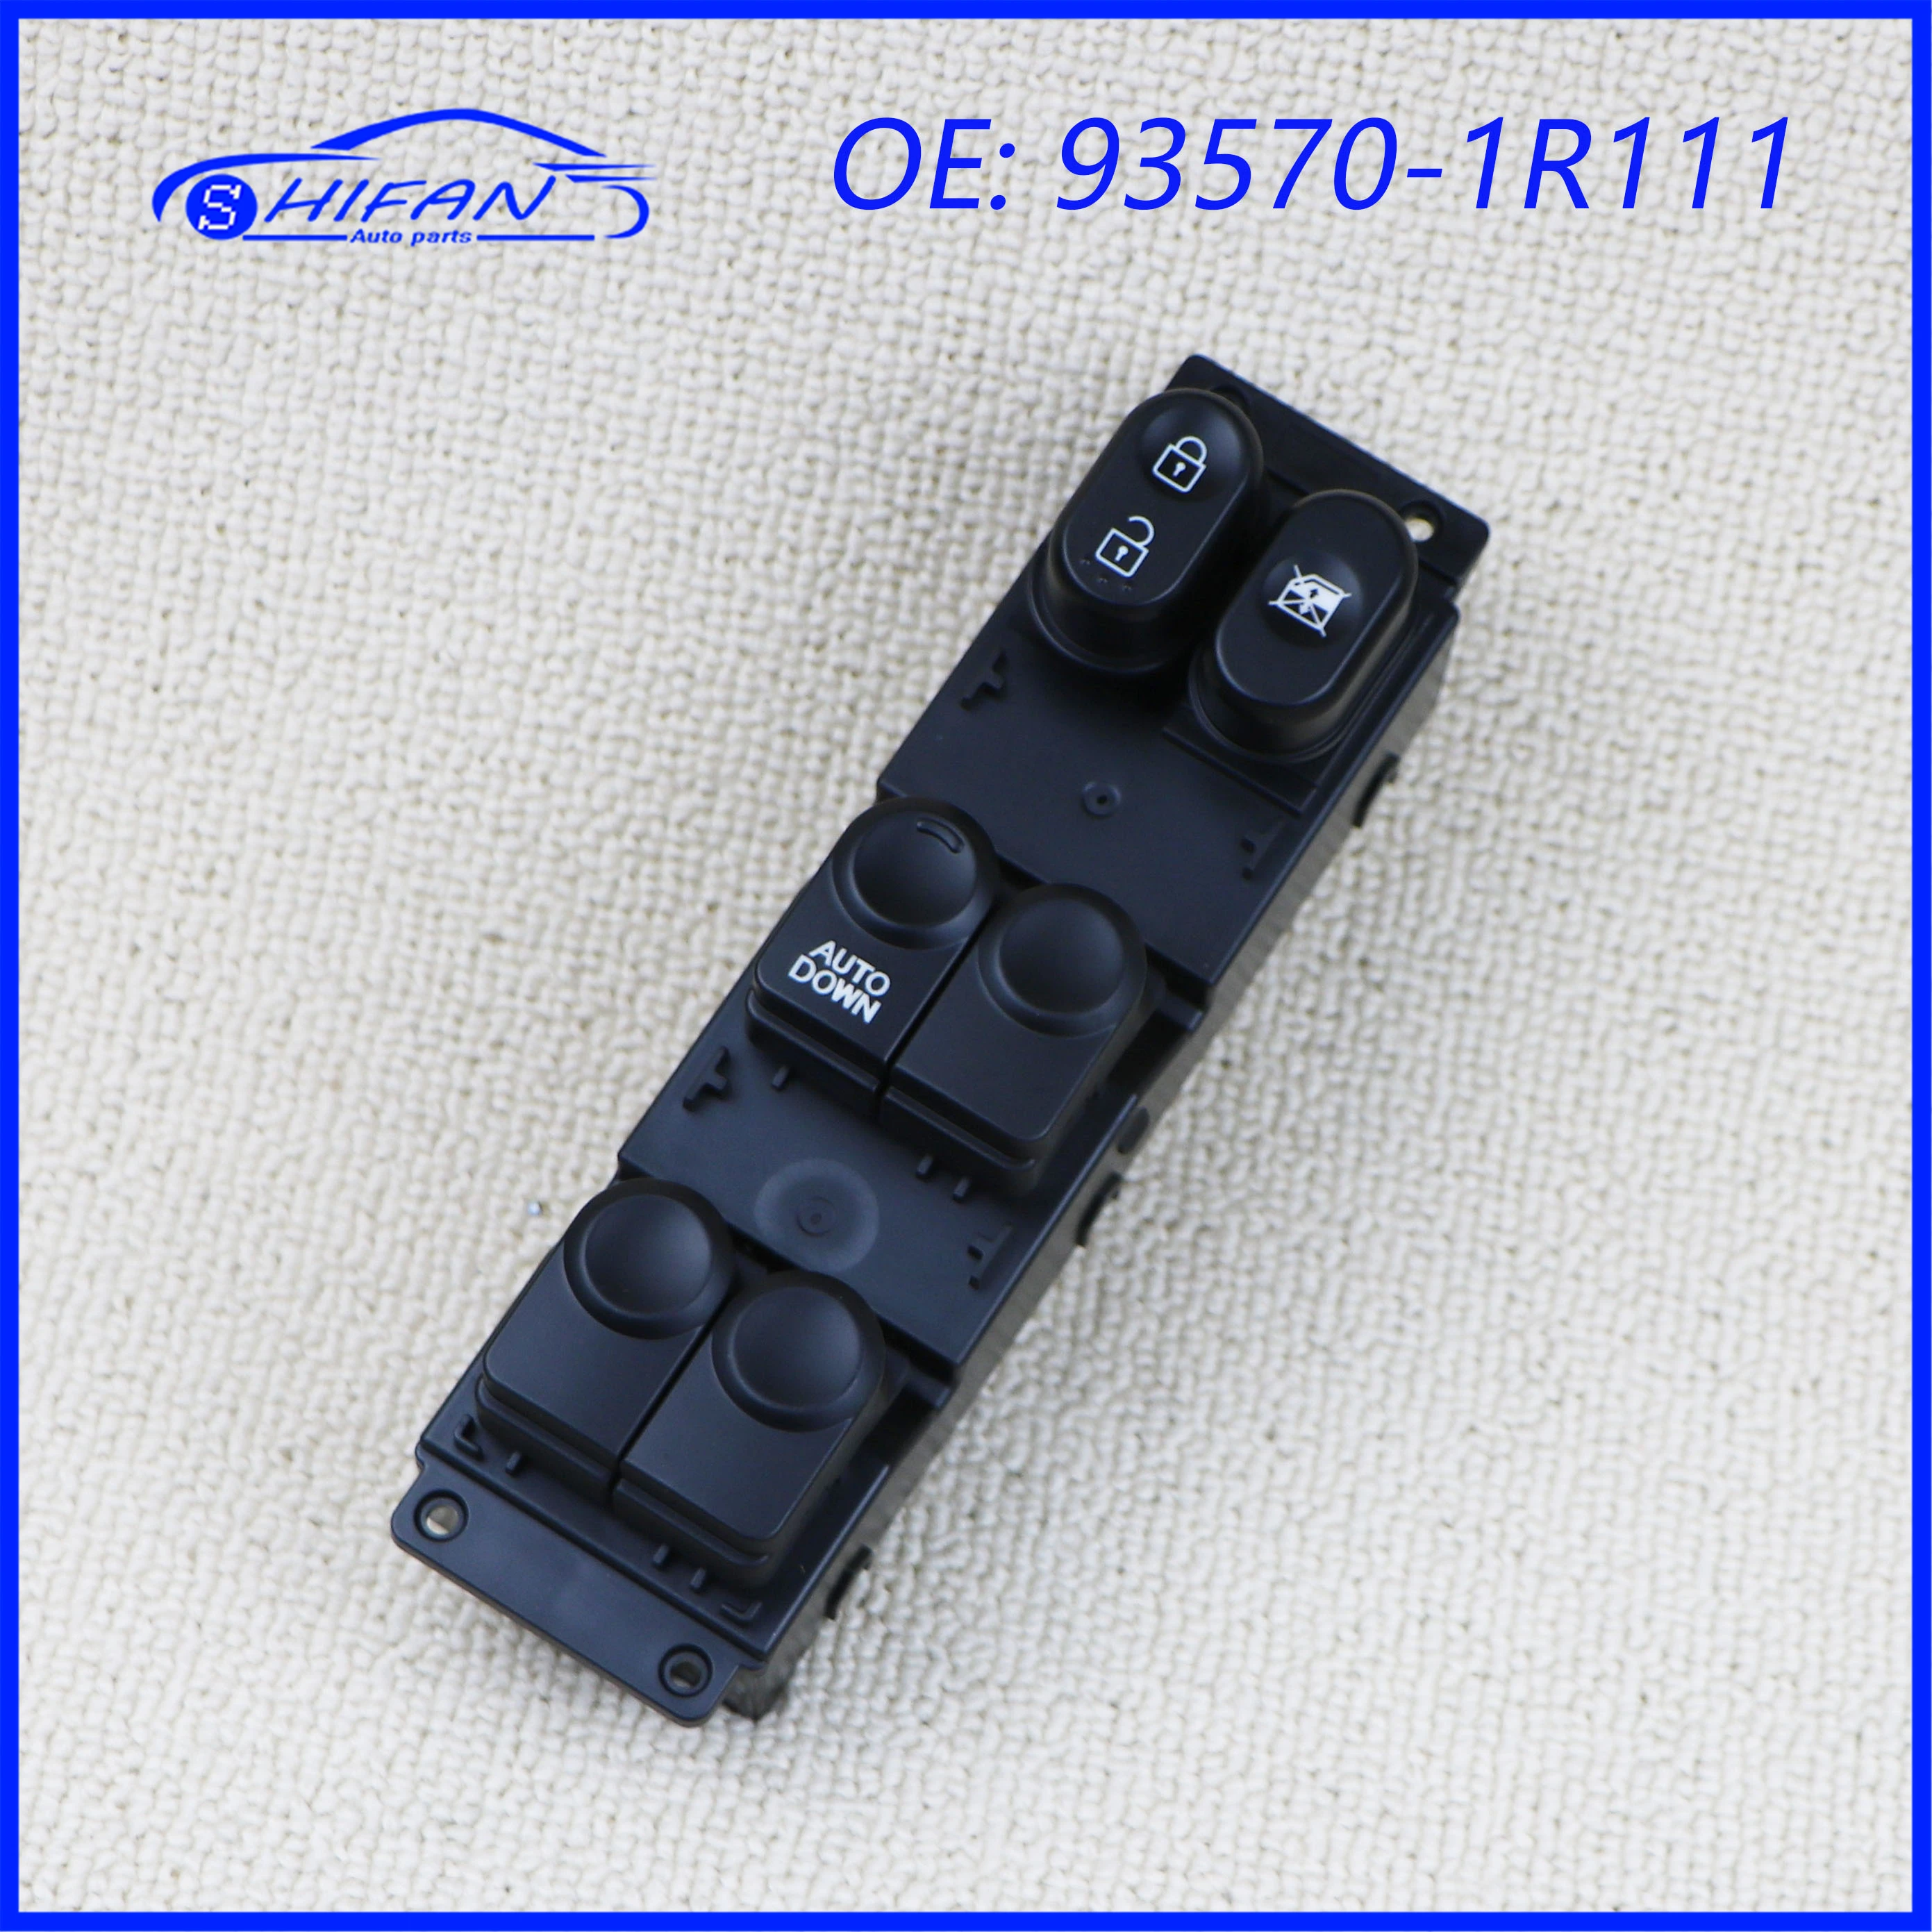 93570-1R111 Car Power Window Control Switch Electric Switch For Hyundai Accent 2010-2017 Car Accessories 935701R111 sorghum 93581 1r000 93580 1r001 electric power window control switch rear left regulator button for hyundai accent 2013 2017